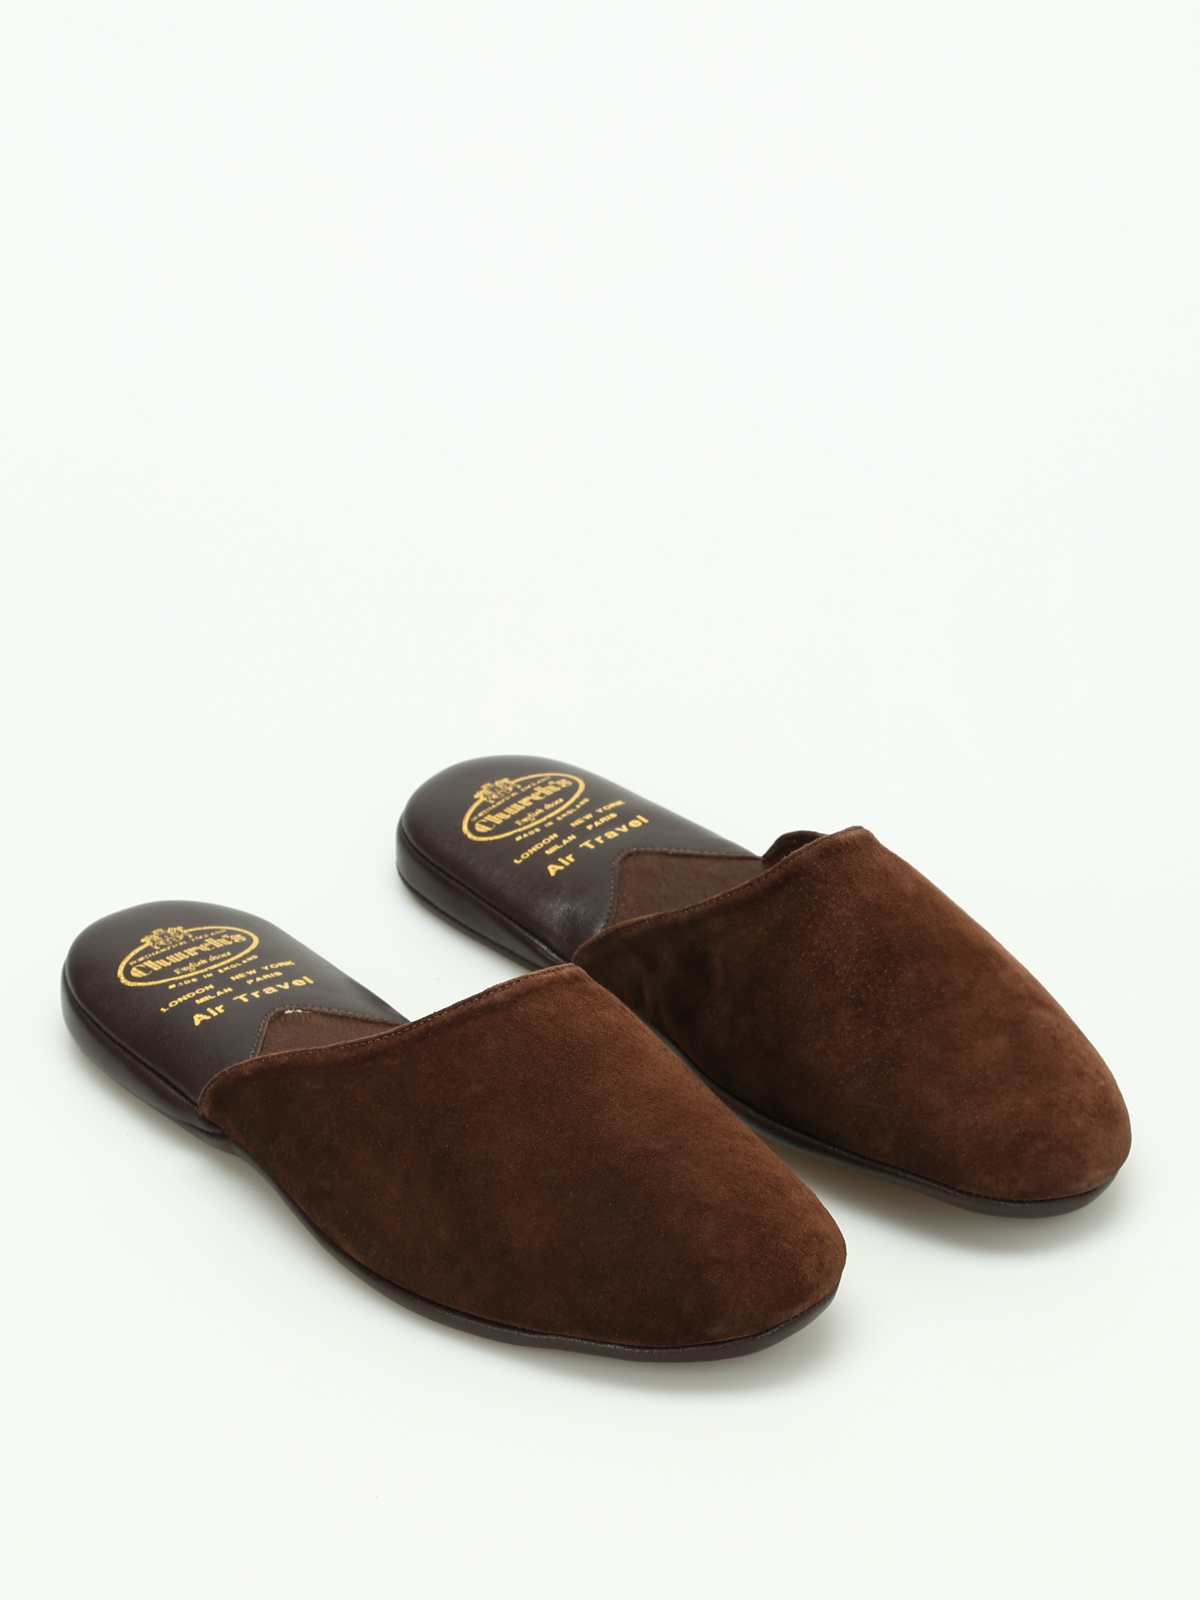 Air Travel suede slippers - Loafers 